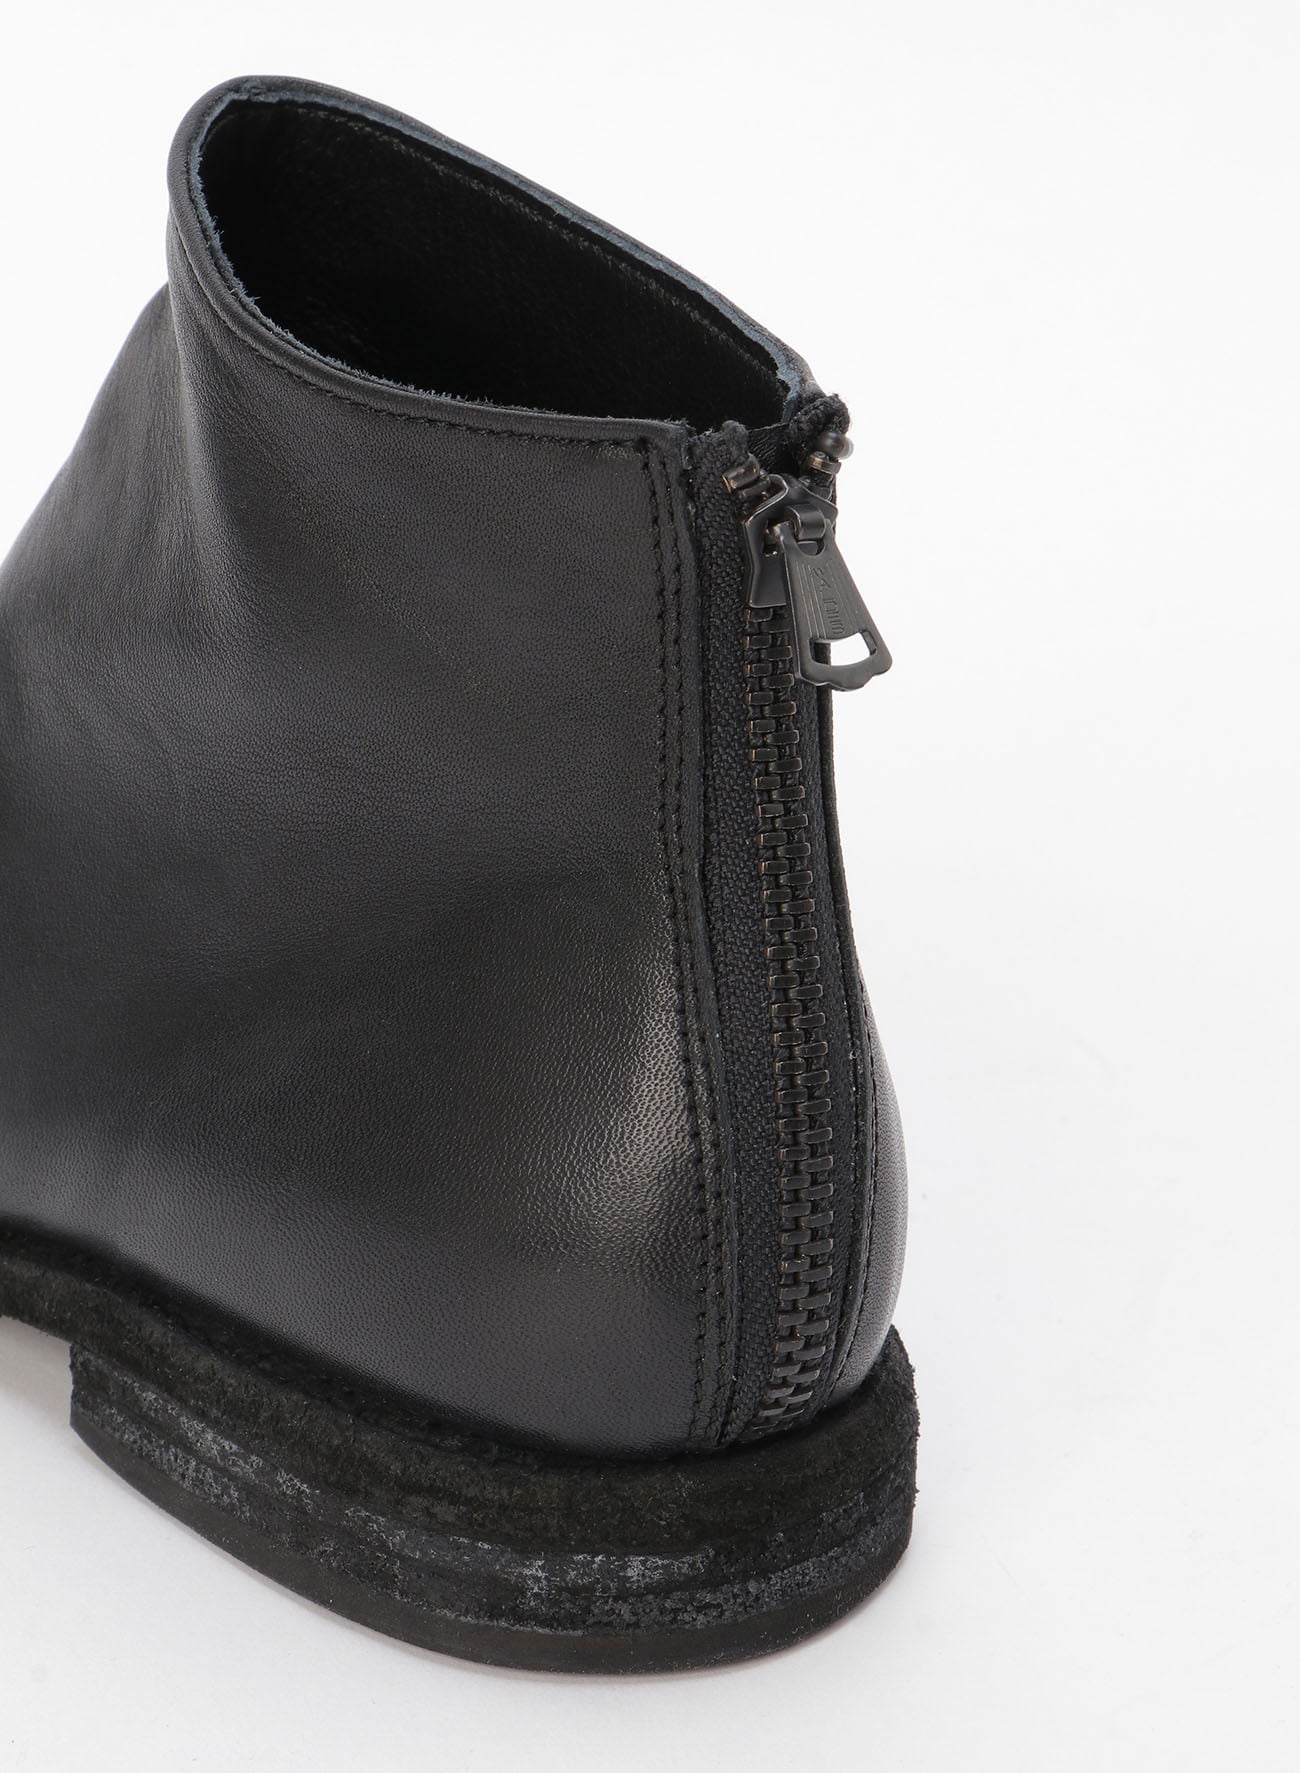 SOFT LEATHER LOW CUT BOOTS WITH BACK ZIPPER(US 3.5 Black): Vintage